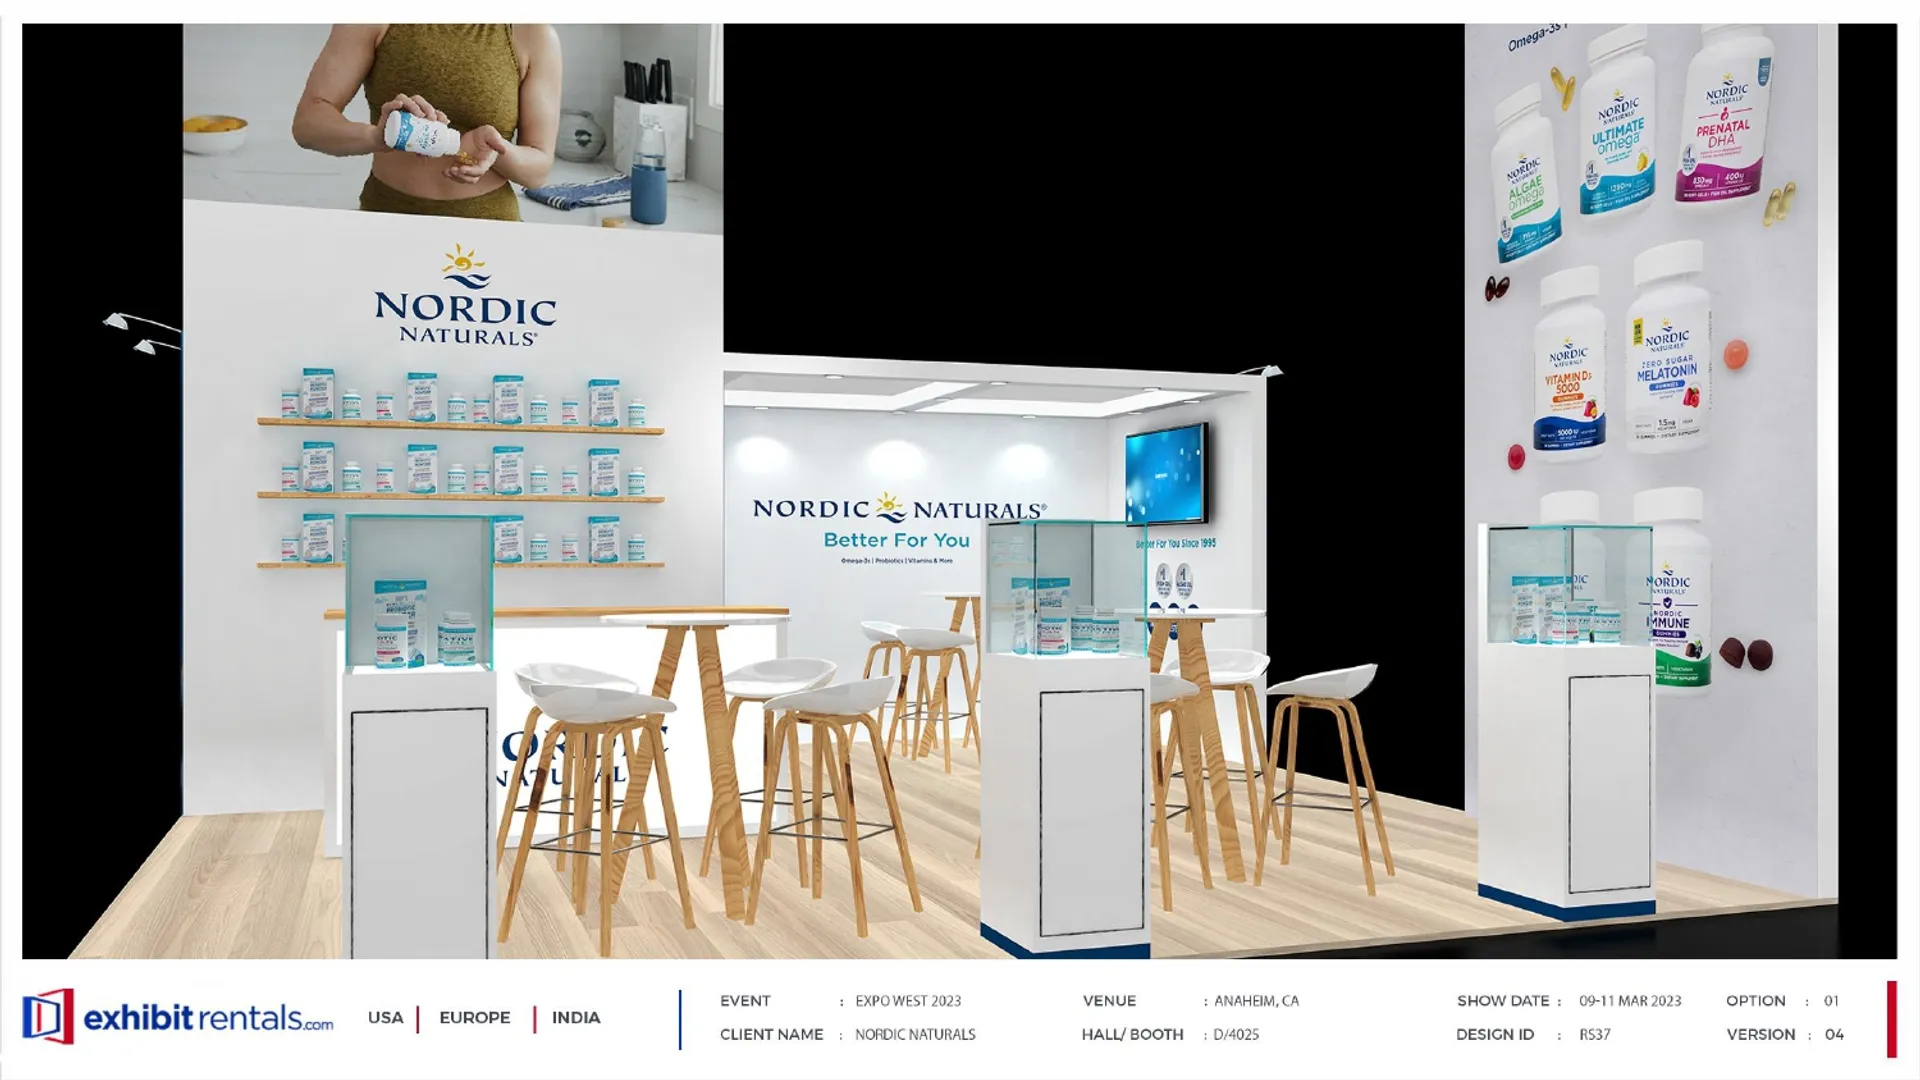 booth-design-projects/Exhibit-Rentals/2024-04-18-20x20-PENINSULA-Project-102/Nordic _naturals_expo_West_v1.6-18_page-0001-kwkucw.jpg